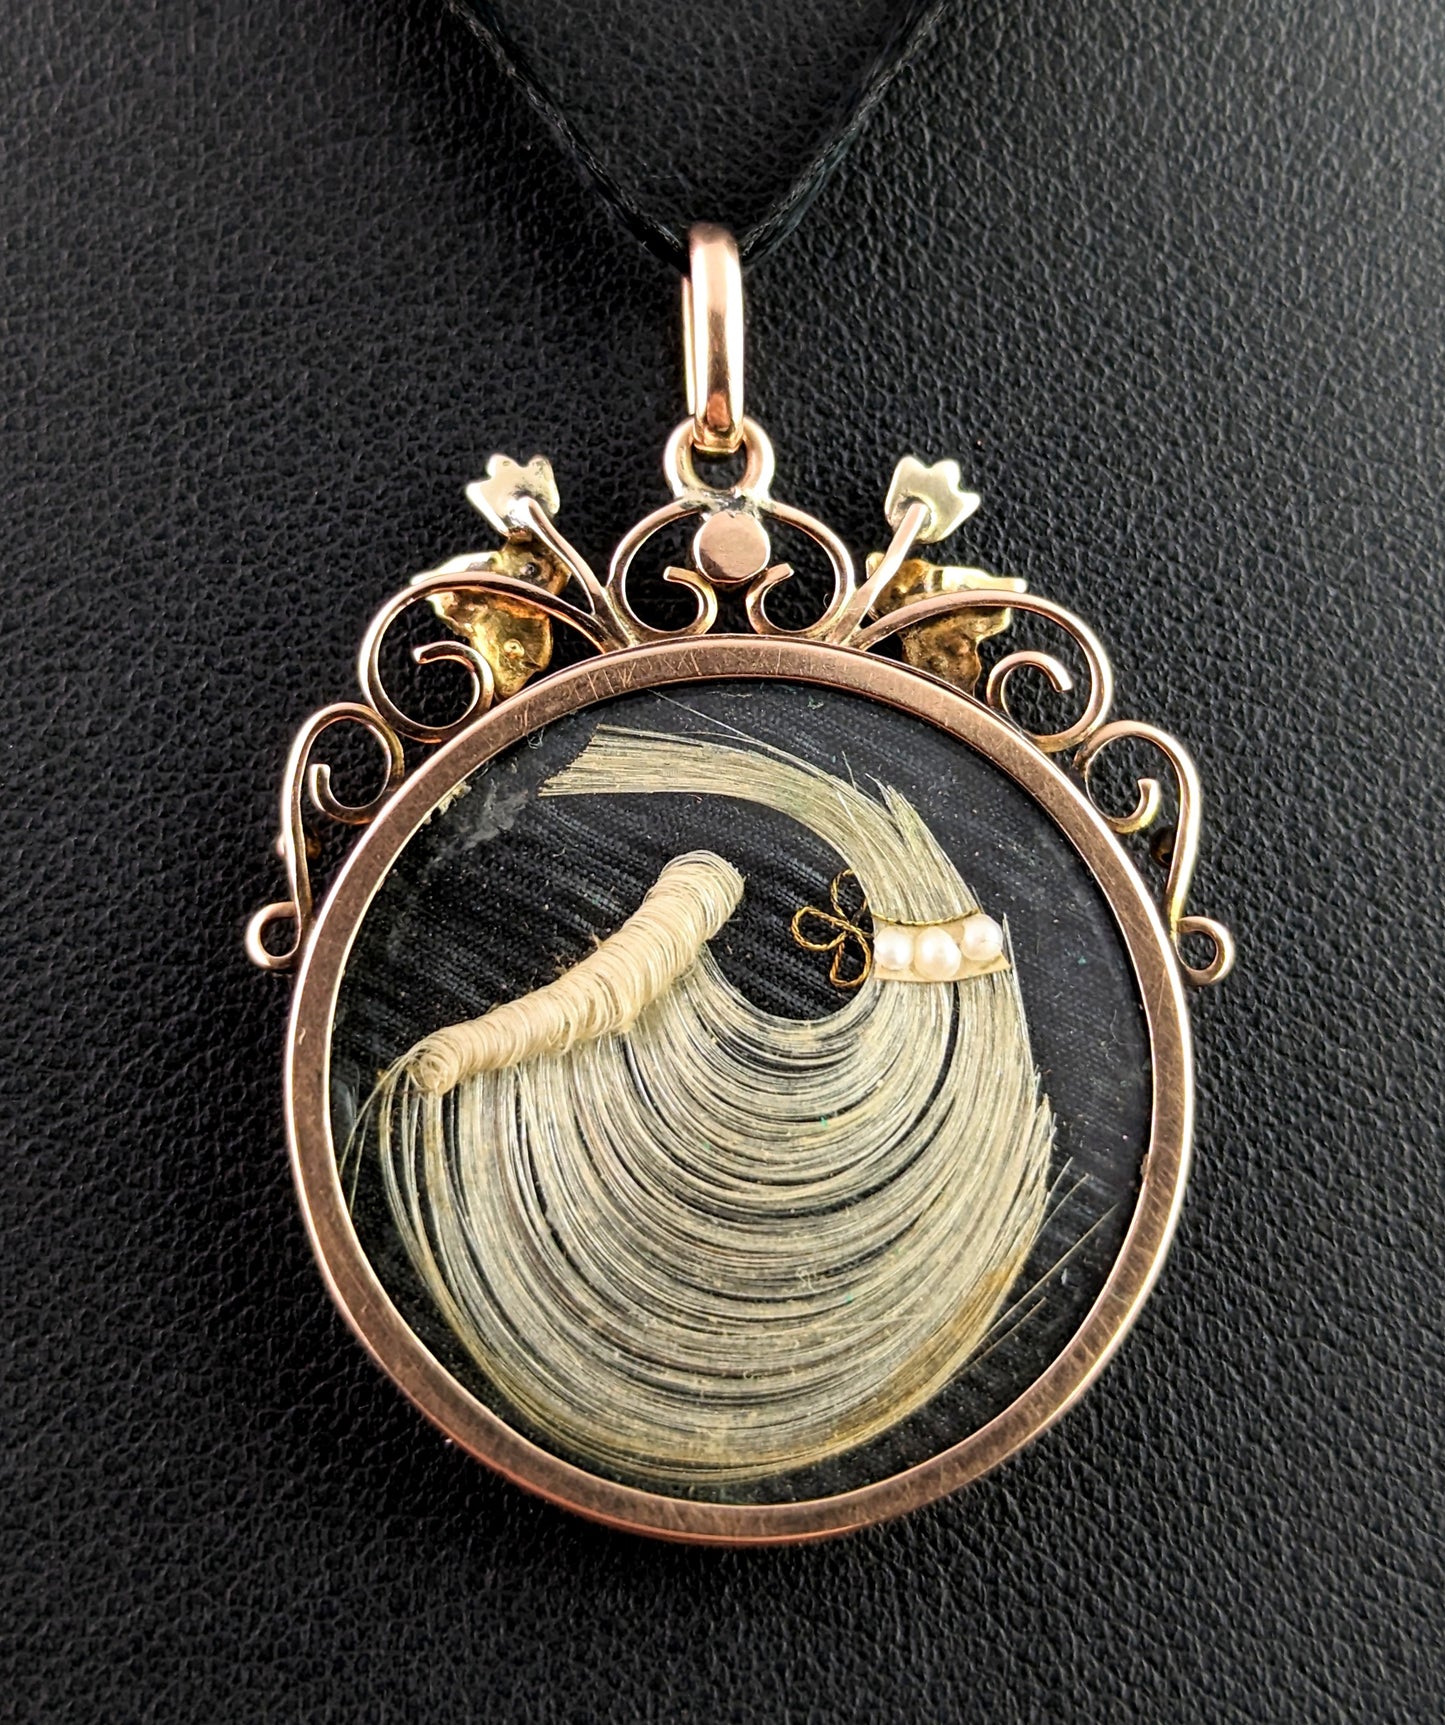 Antique Mourning locket pendant, 9ct gold, portrait, turquoise and pearl